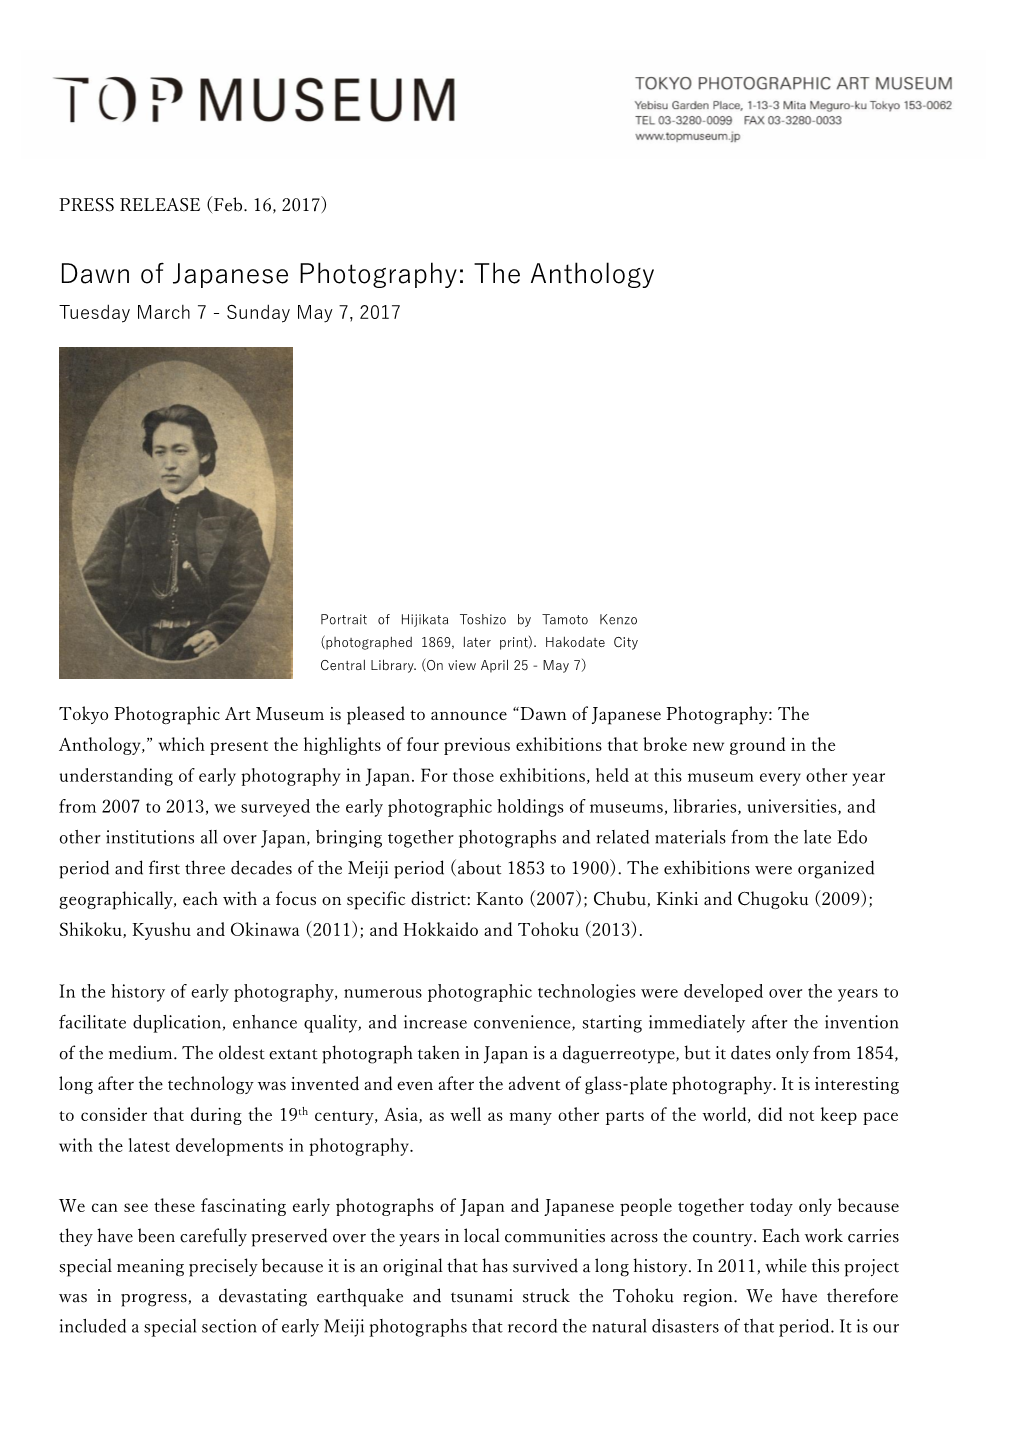 Dawn of Japanese Photography: the Anthology Tuesday March 7 - Sunday May 7, 2017